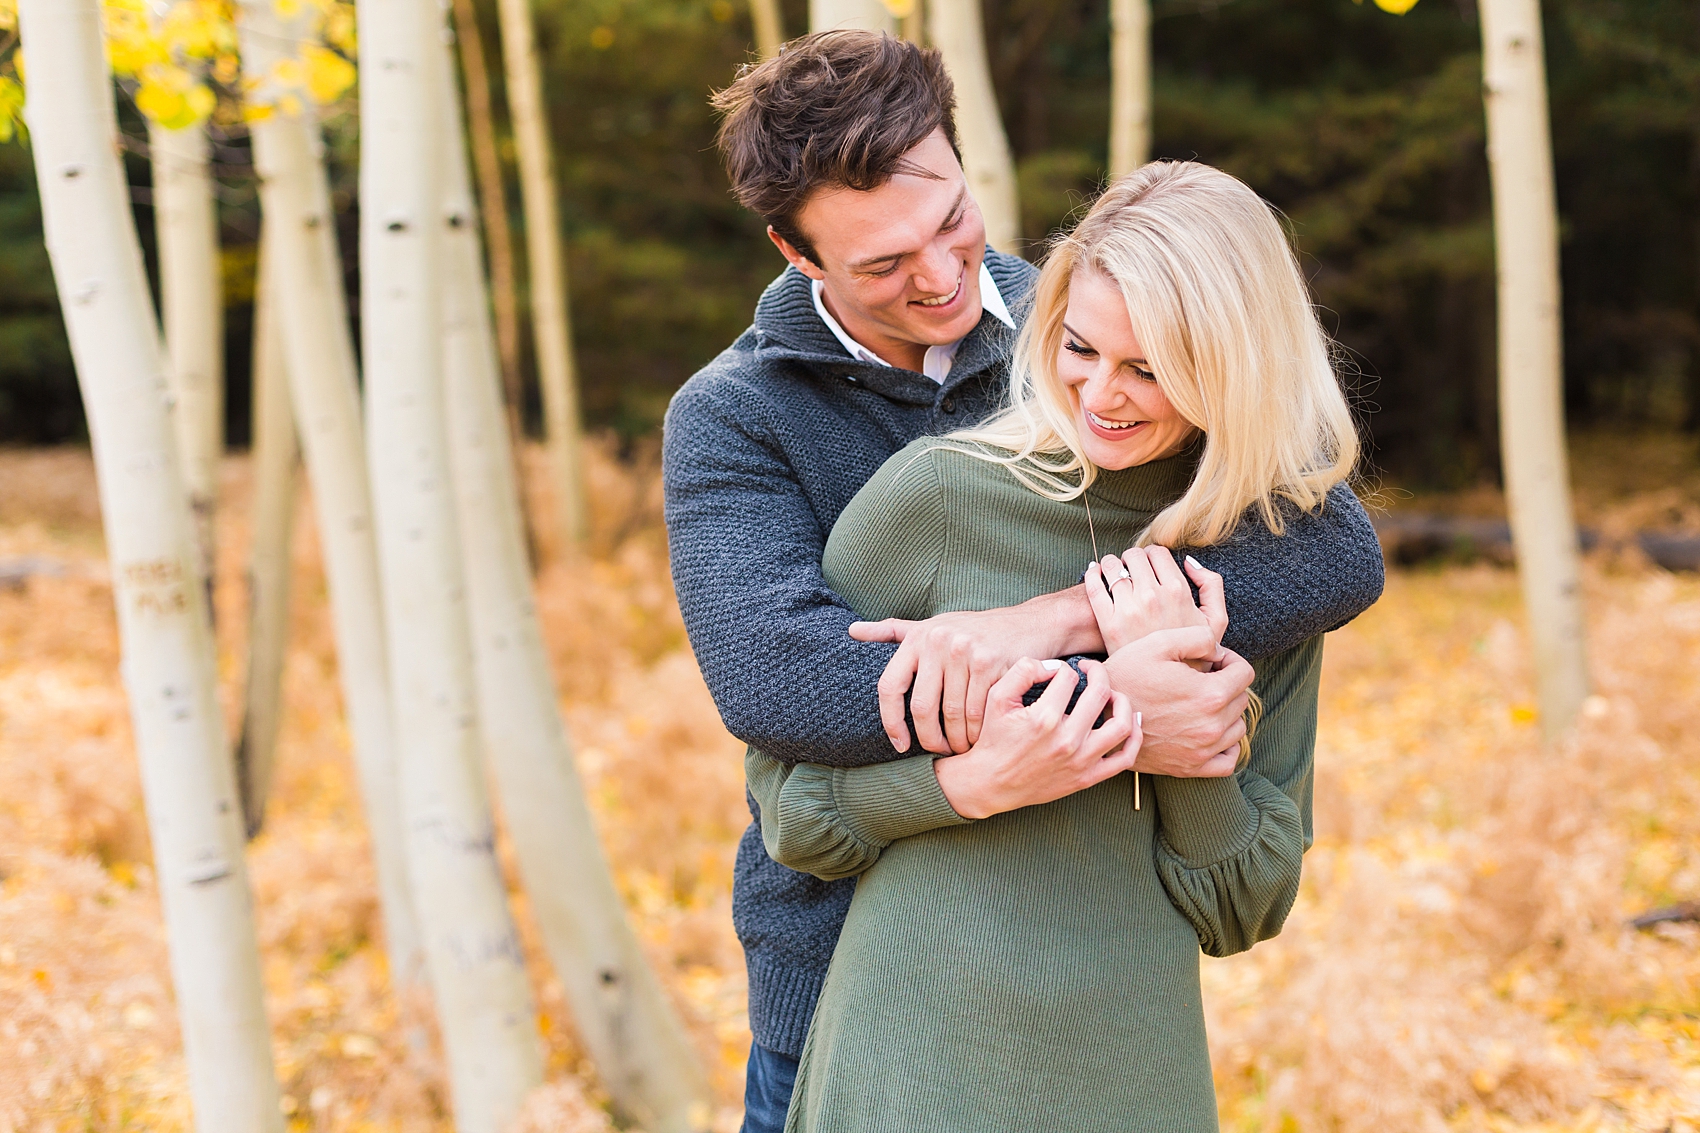 Leah Hope Photography | Flagstaff Arizona | Aspen Corner | Fall Yellow Aspen Leaves | Engagement Pictures | What to Wear | Couples Poses | In Love | Engaged